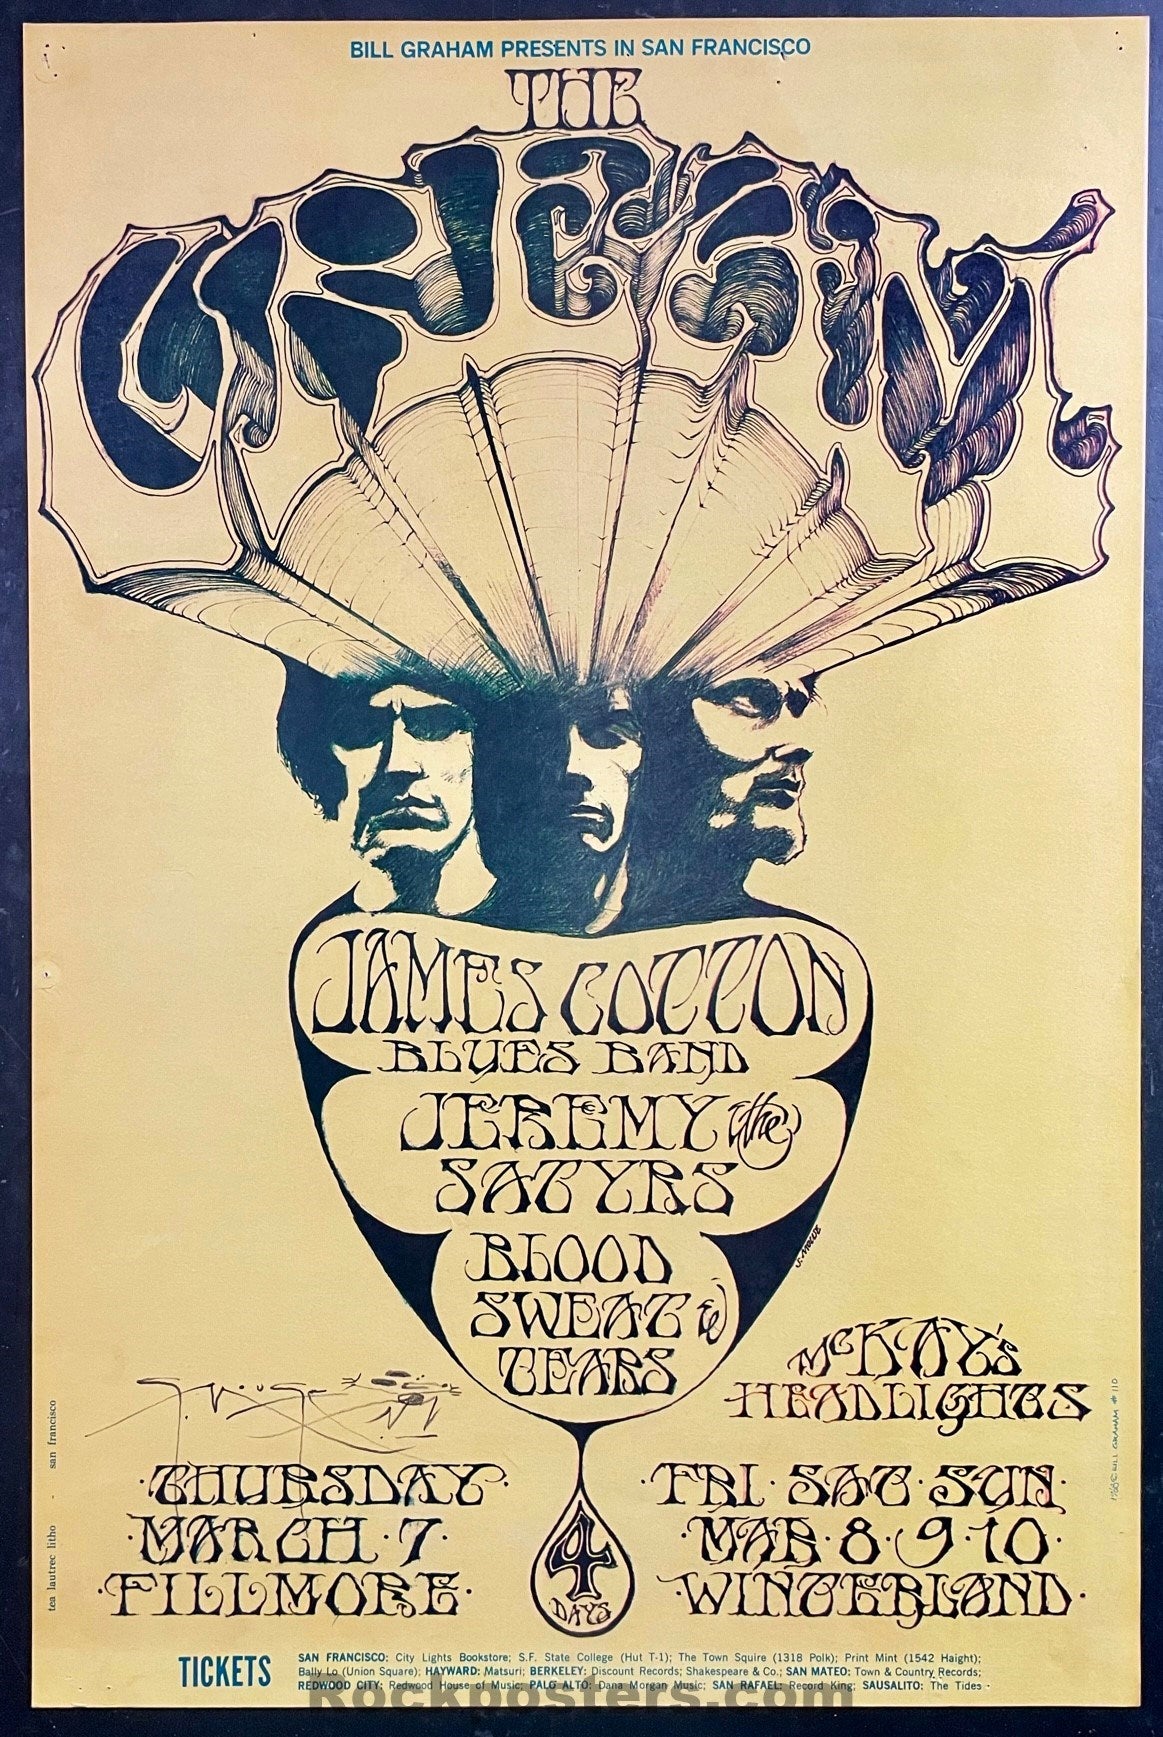 AUCTION - BG-110 - Cream - Stanley Mouse Signed - 1968 Poster - Fillmore Auditorium - Very Good